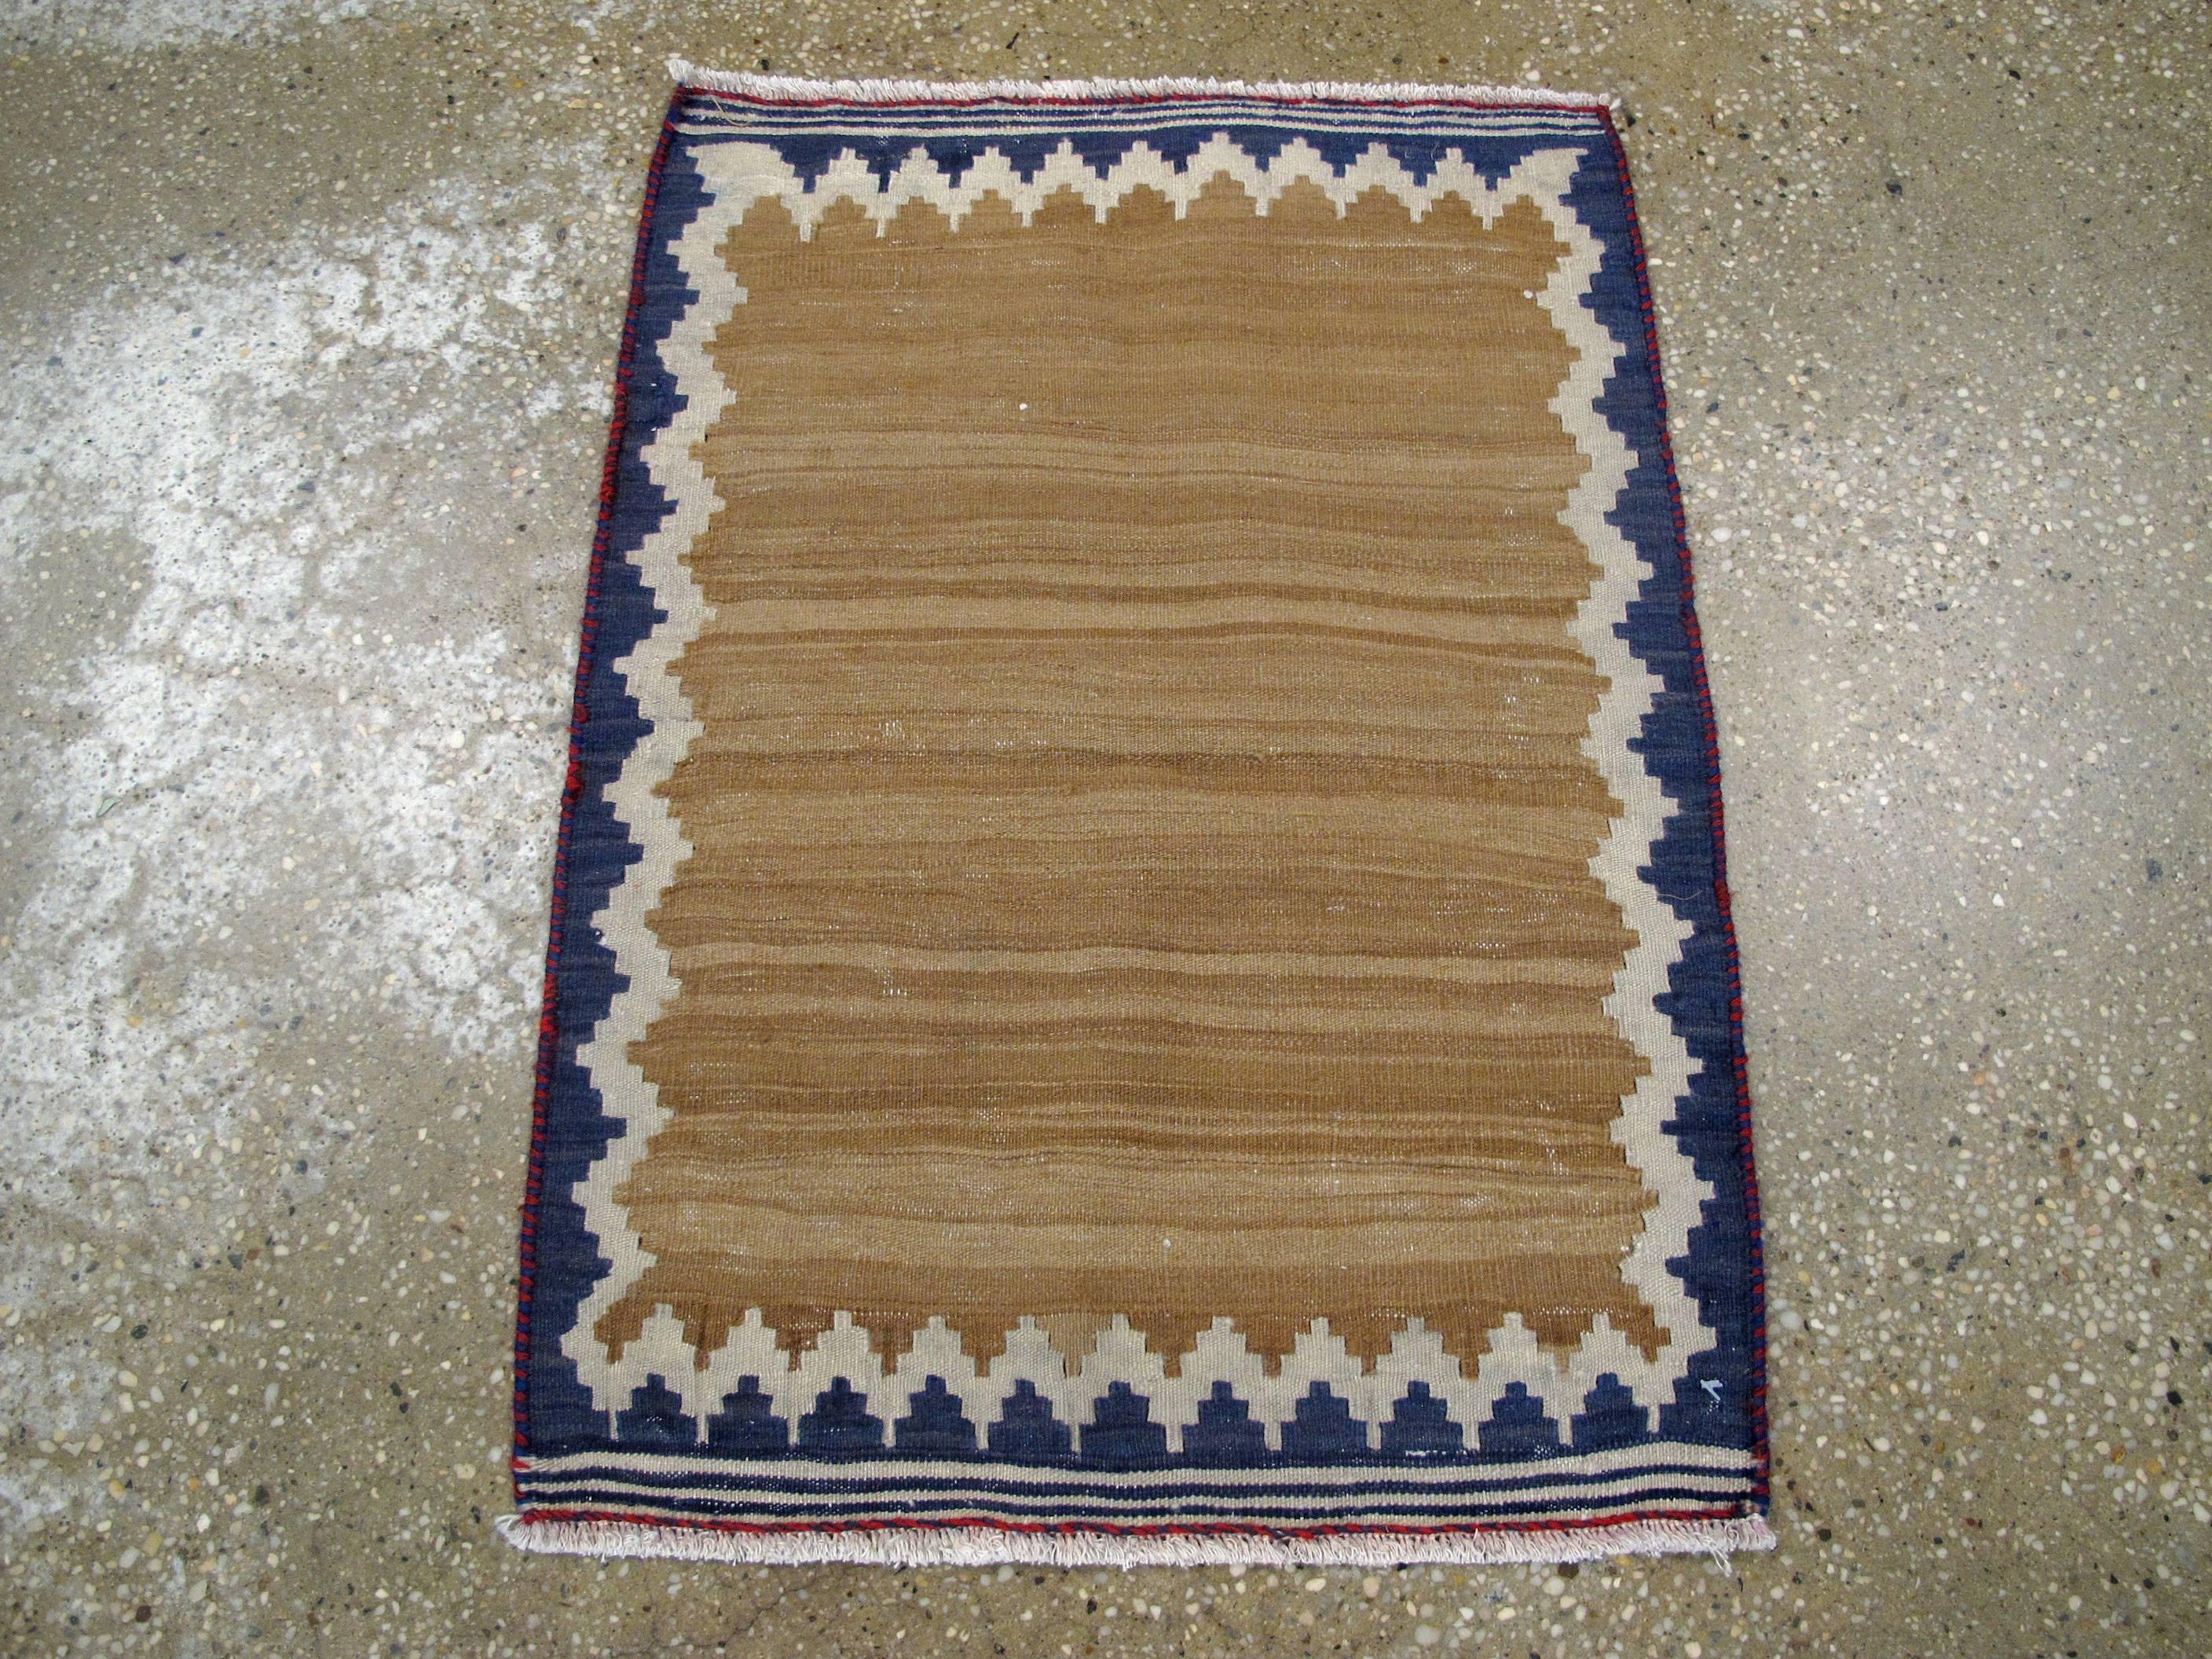 A vintage Persian Kilim flat-woven rug from the mid-20th century.

Measures: 1' 6